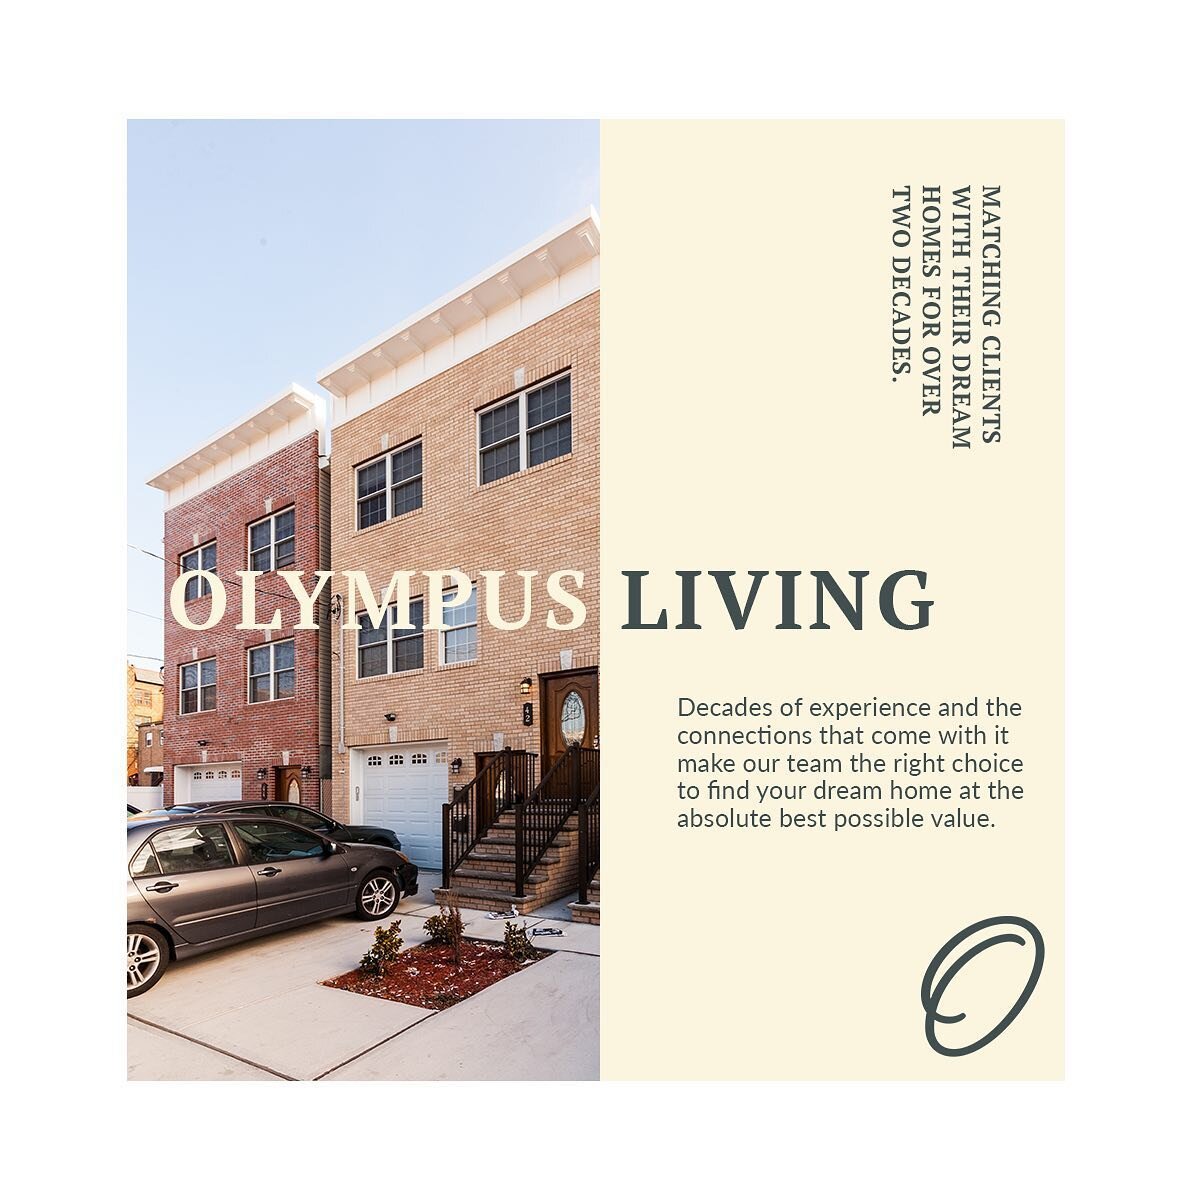 Olympus Living Realty is a premiere provider of services in Jersey City and the surrounding area.  Visit our website to learn why and view listings.  Link in bio. 
#realestate #realty #broker #property #home #listing #jerseycity #journalsquare